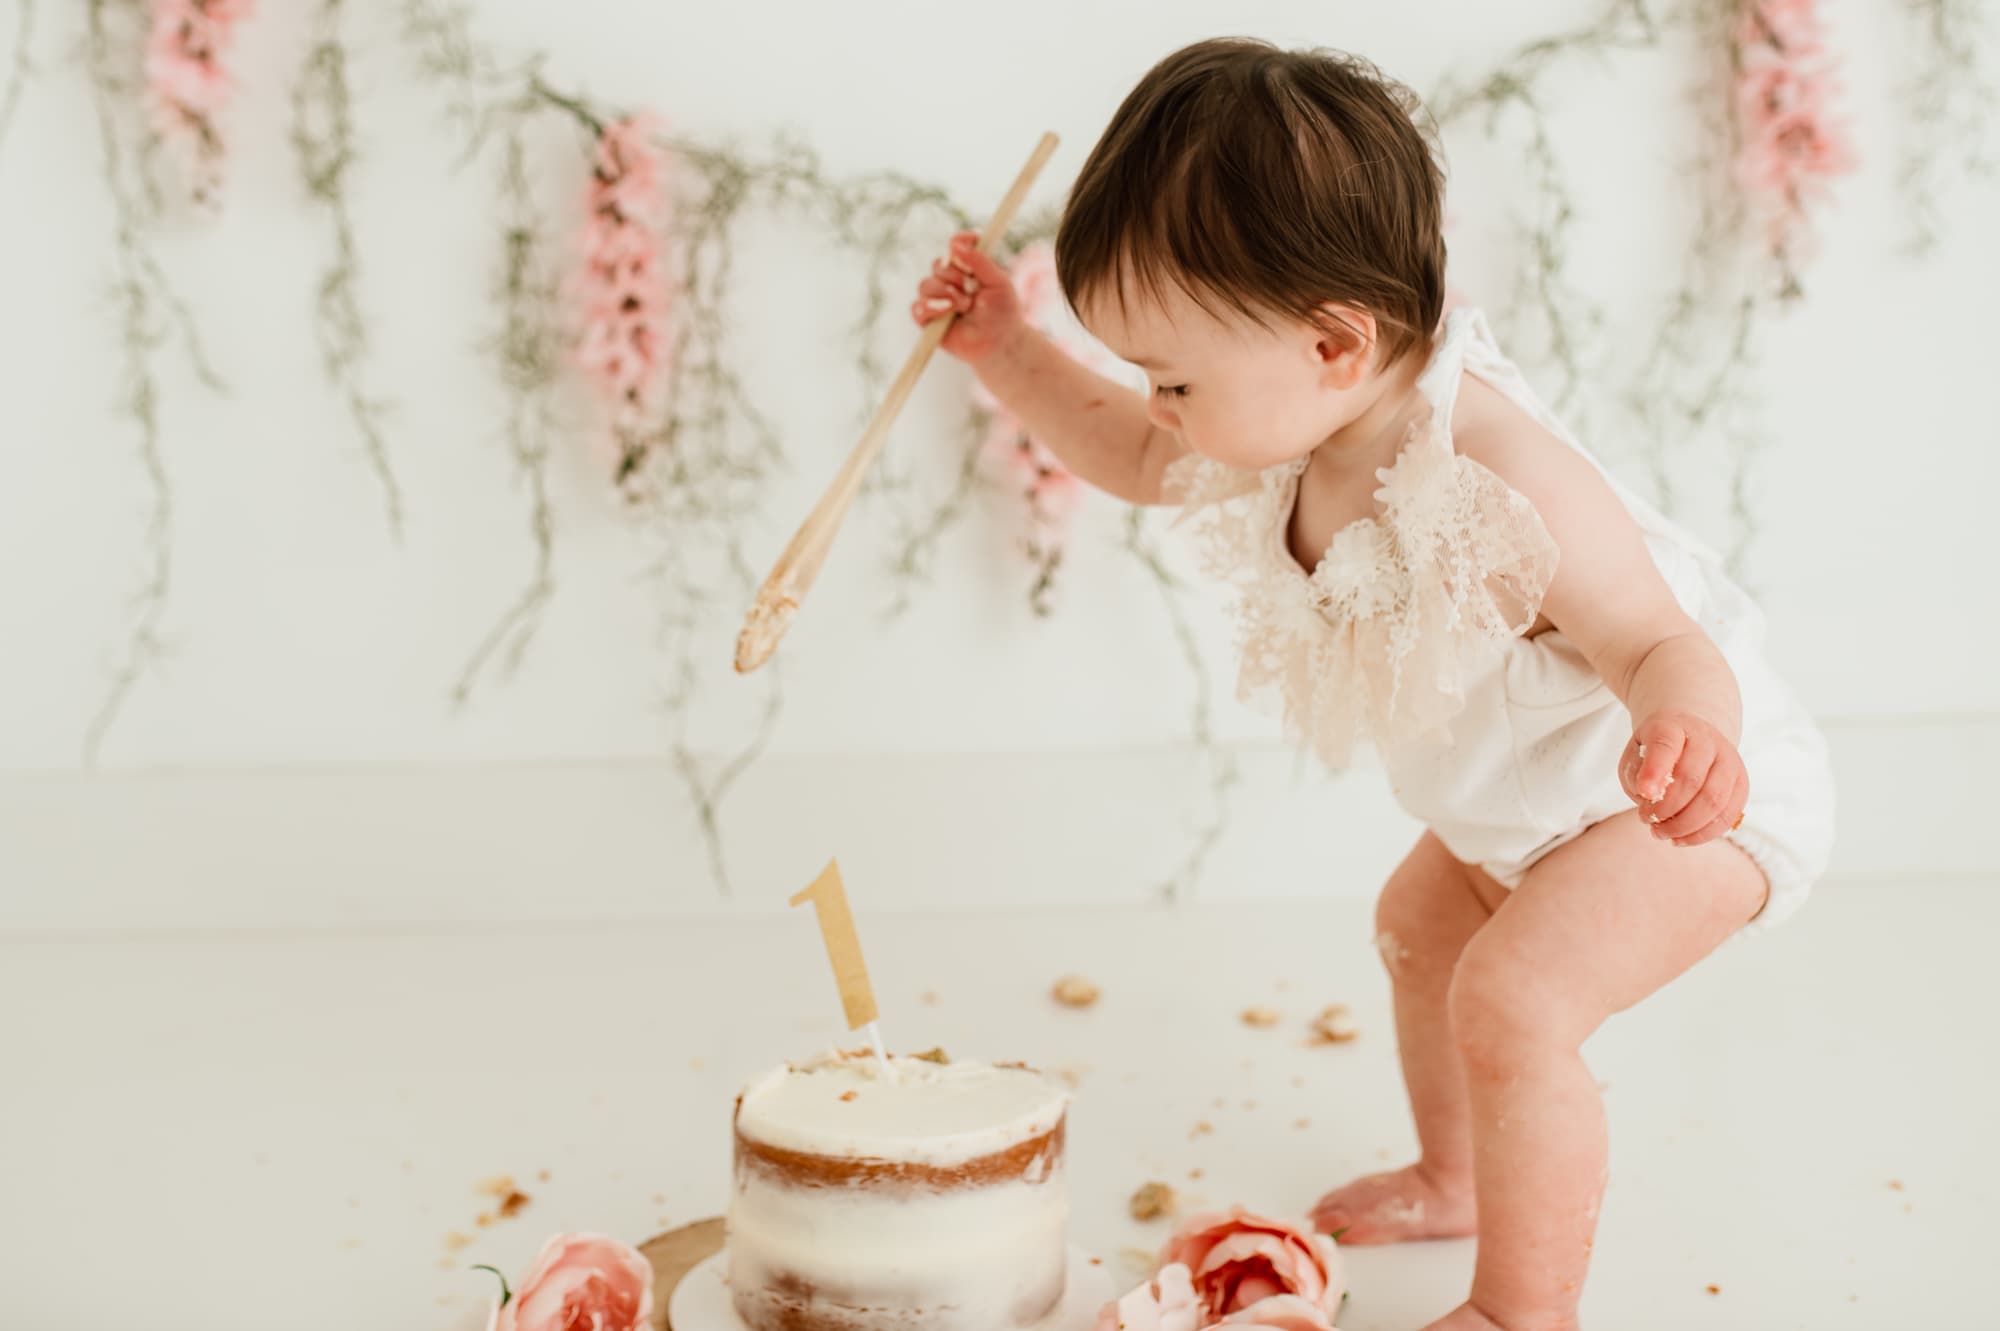 Toddler girl smashing her cake with a wooden spoon.